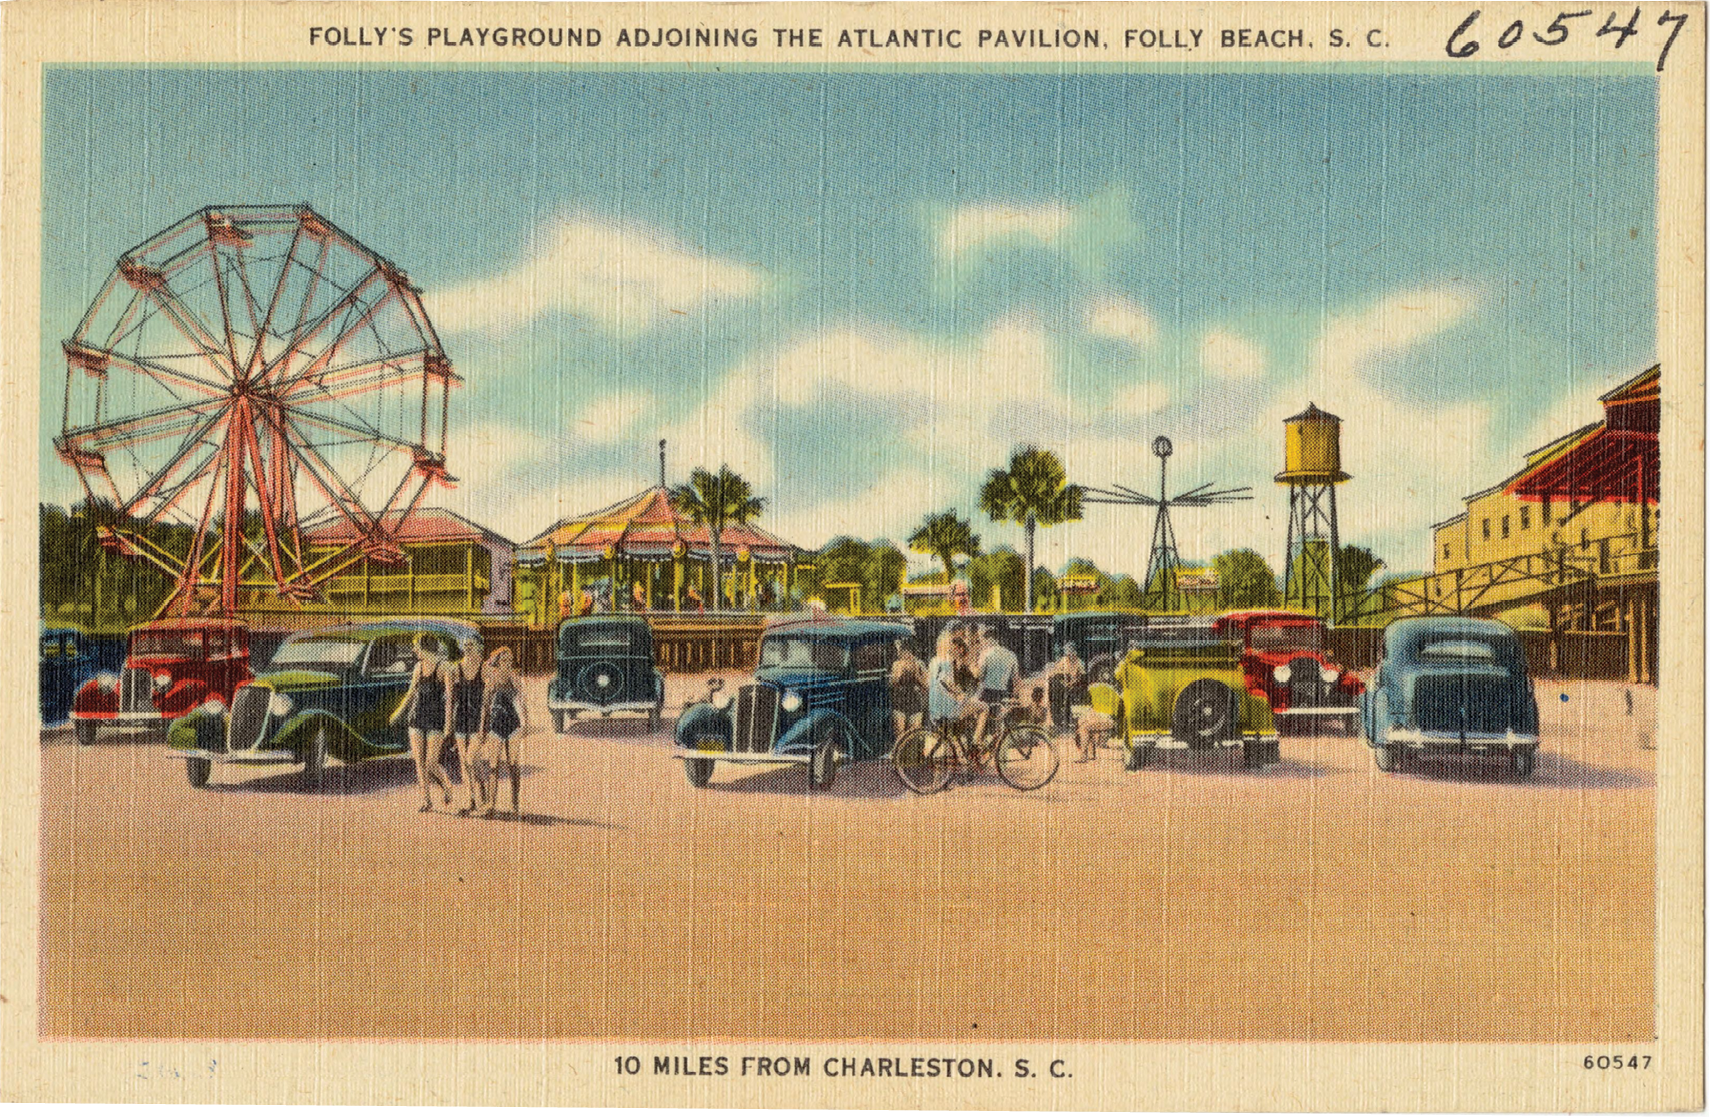 Folly’s Playground:  (Above) The amusements and rides at the Atlantic Pavilion and “Parking on the Beach directly in front of Pavilion”